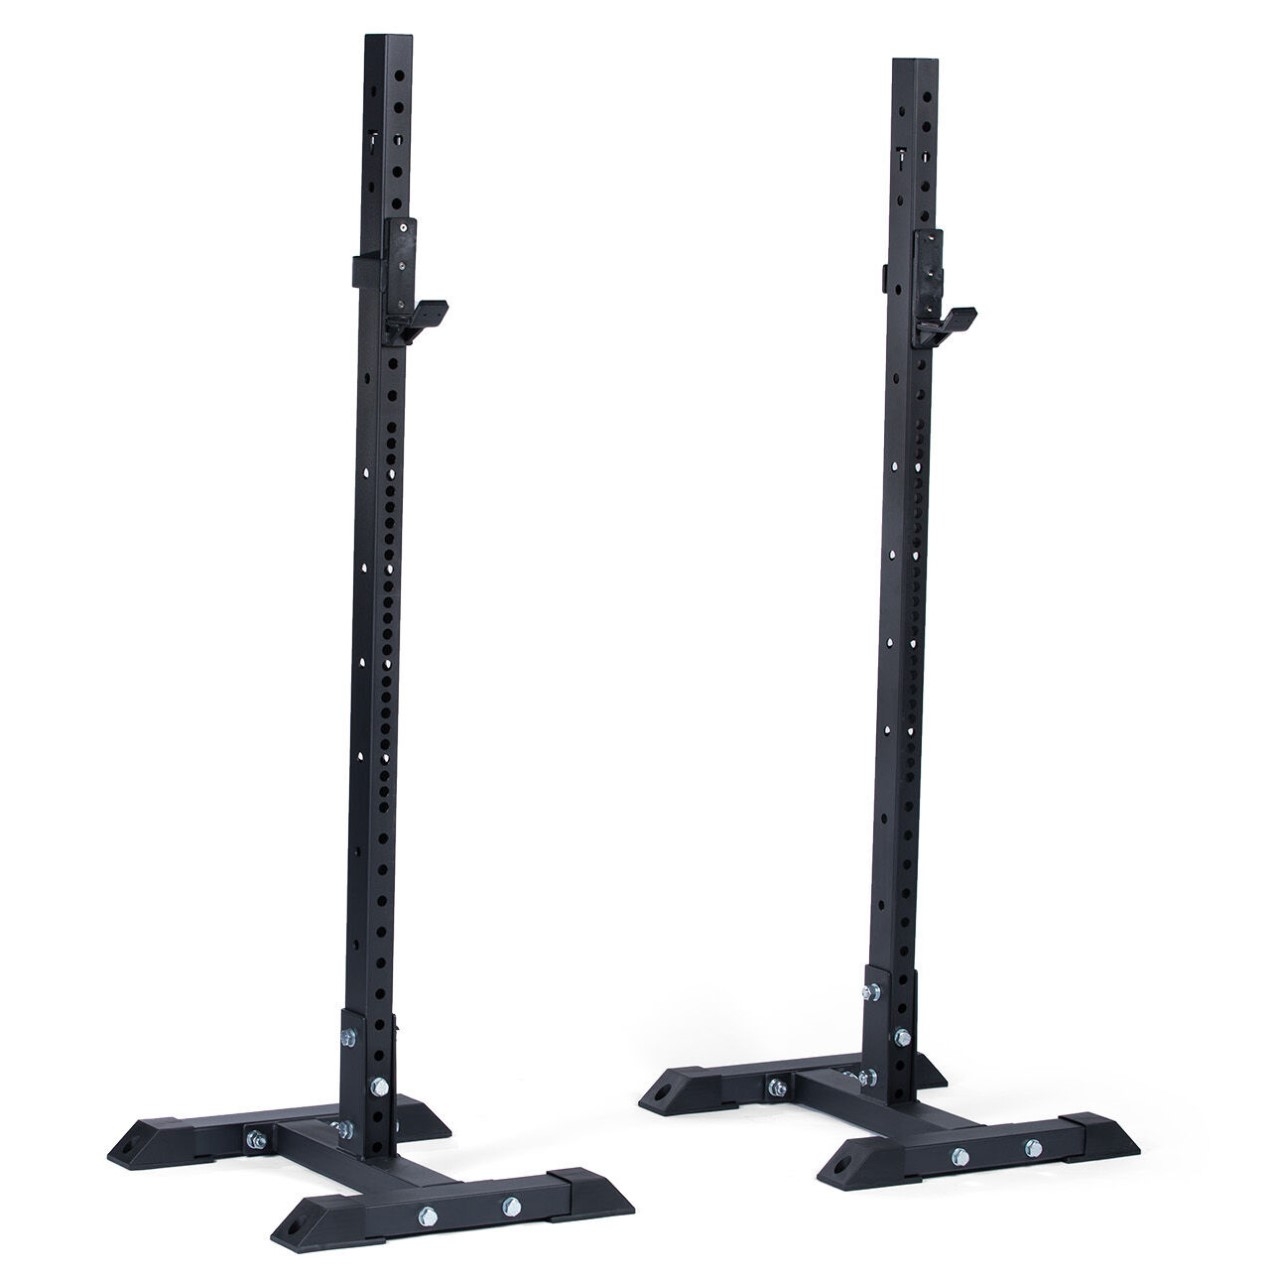 independent squat stands vs power rack